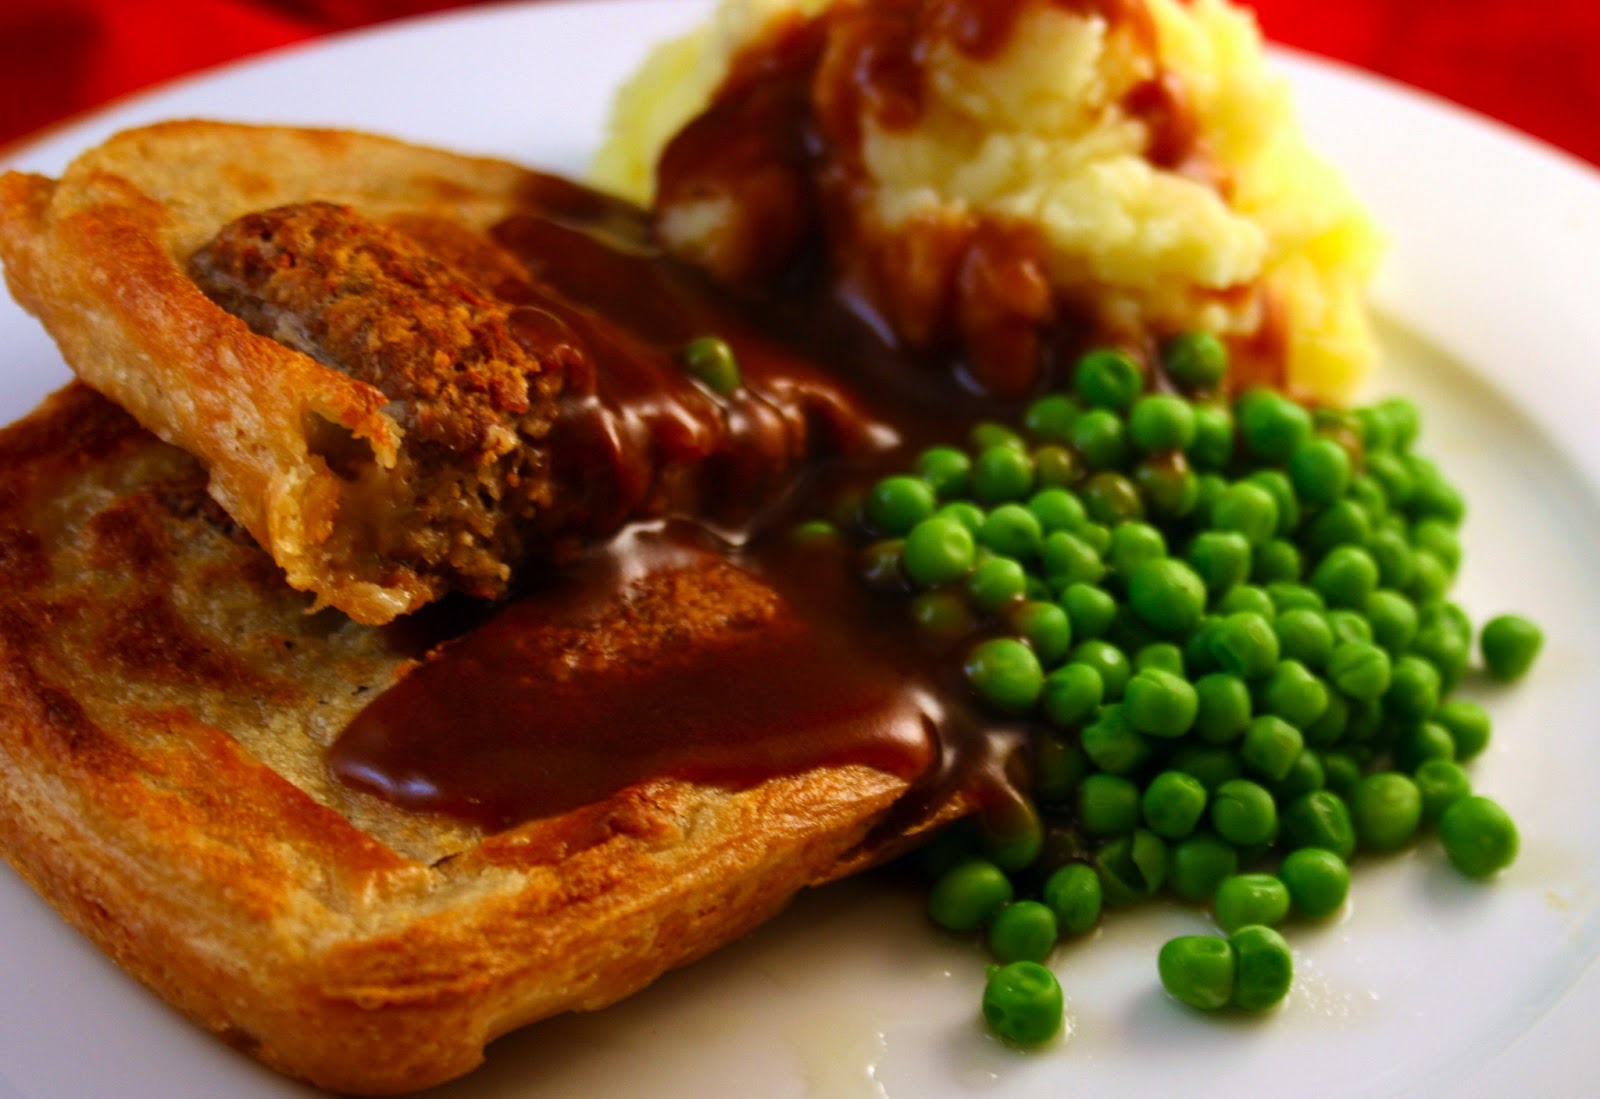 Hef's kitchen: Vegan Toad in the Hole